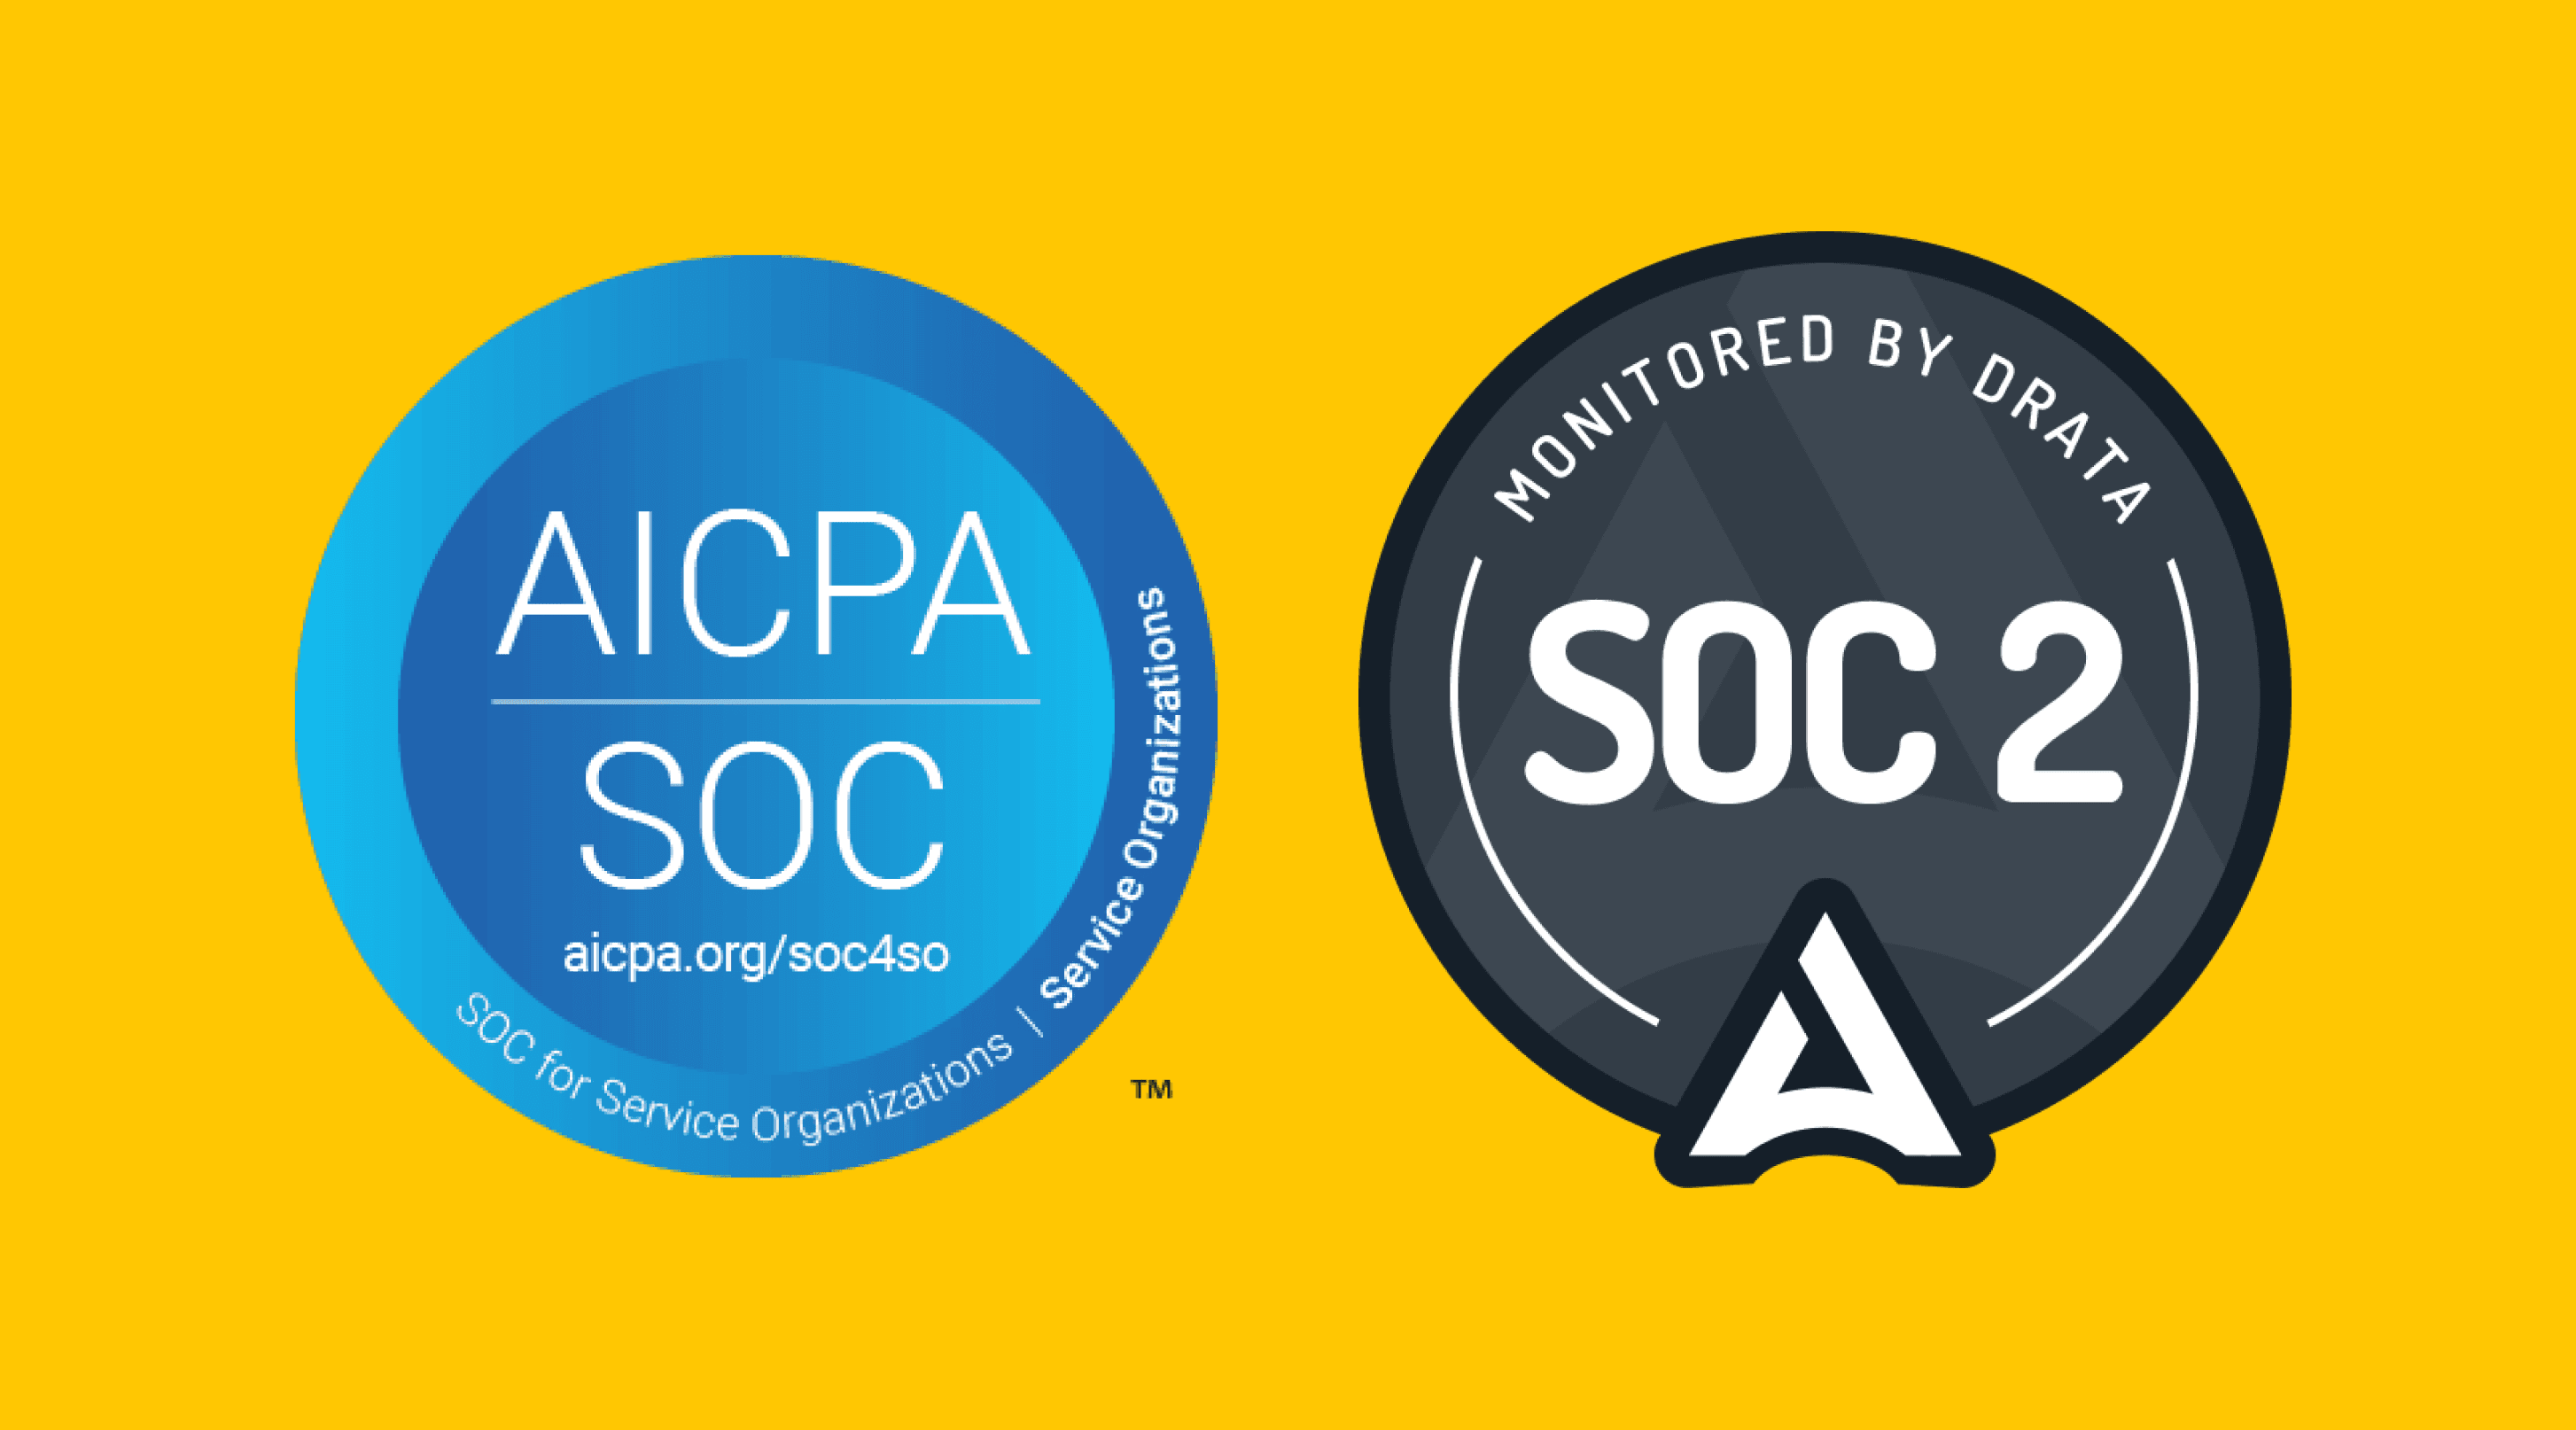 AICPA SOC seal and a badge that reads: Monitored by Drata SOC 2.